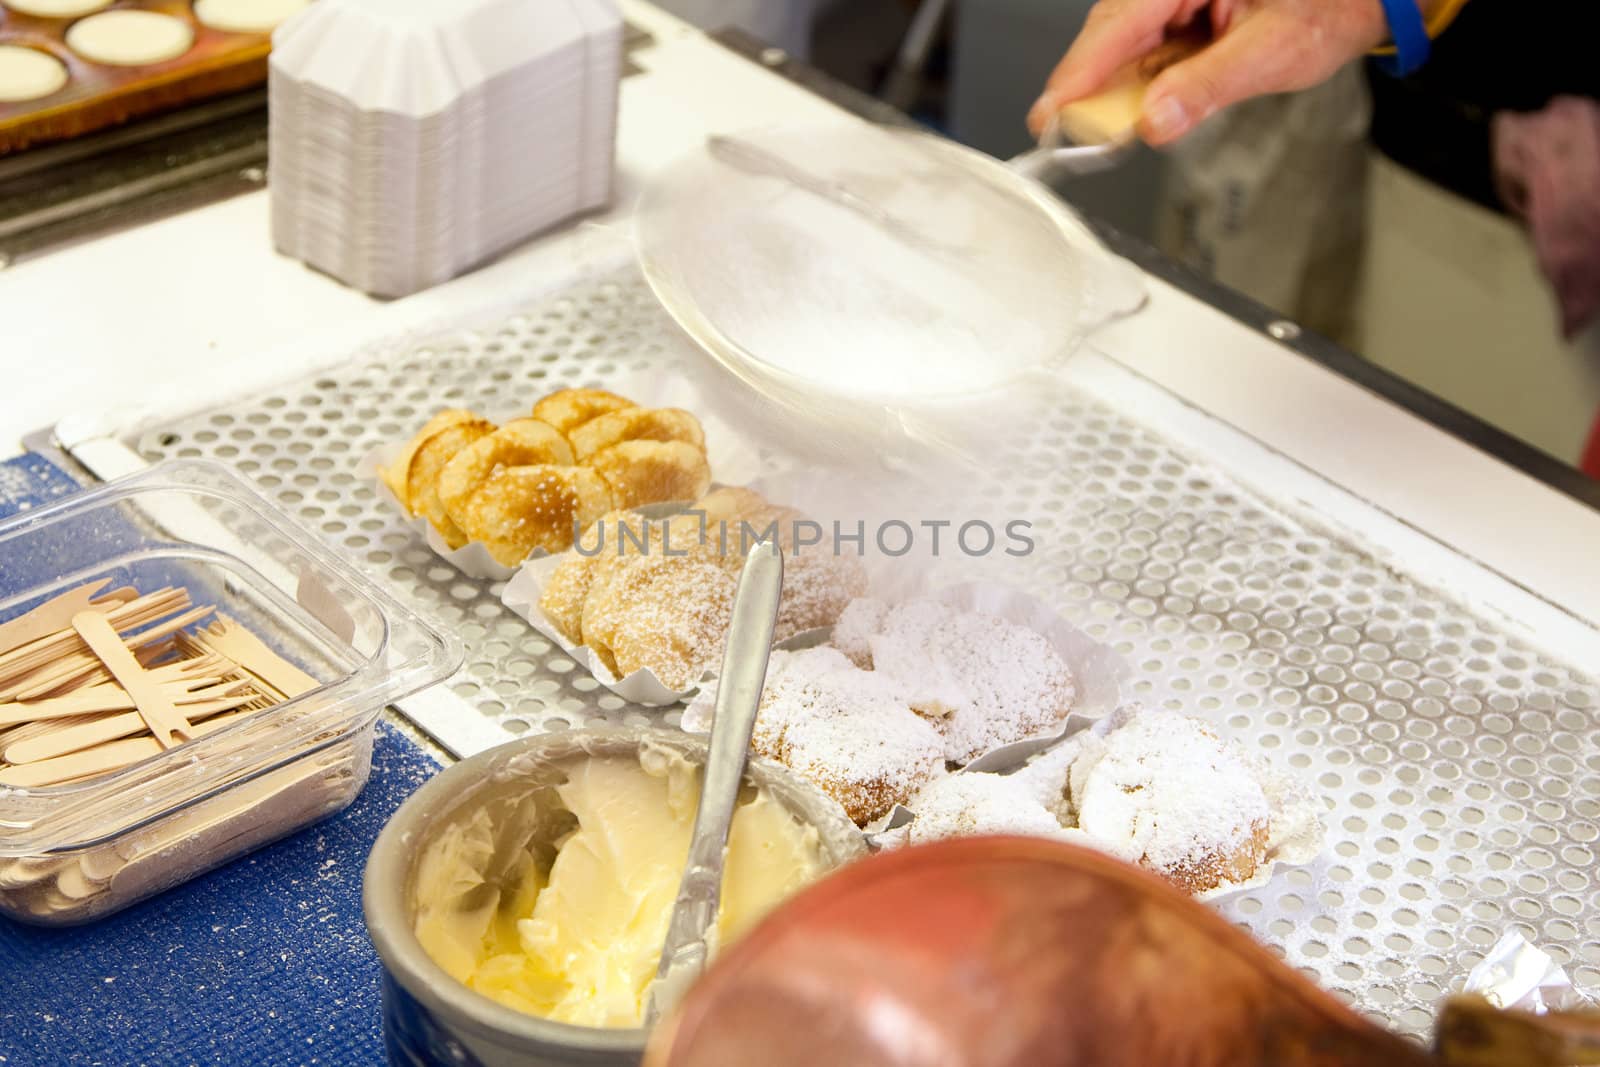 Delicious authentic Dutch food from The Netherlands called poffertjes, which are mini pancakes, being prepared for sale by adding butter and powdered confectioners sugar with a strainer.